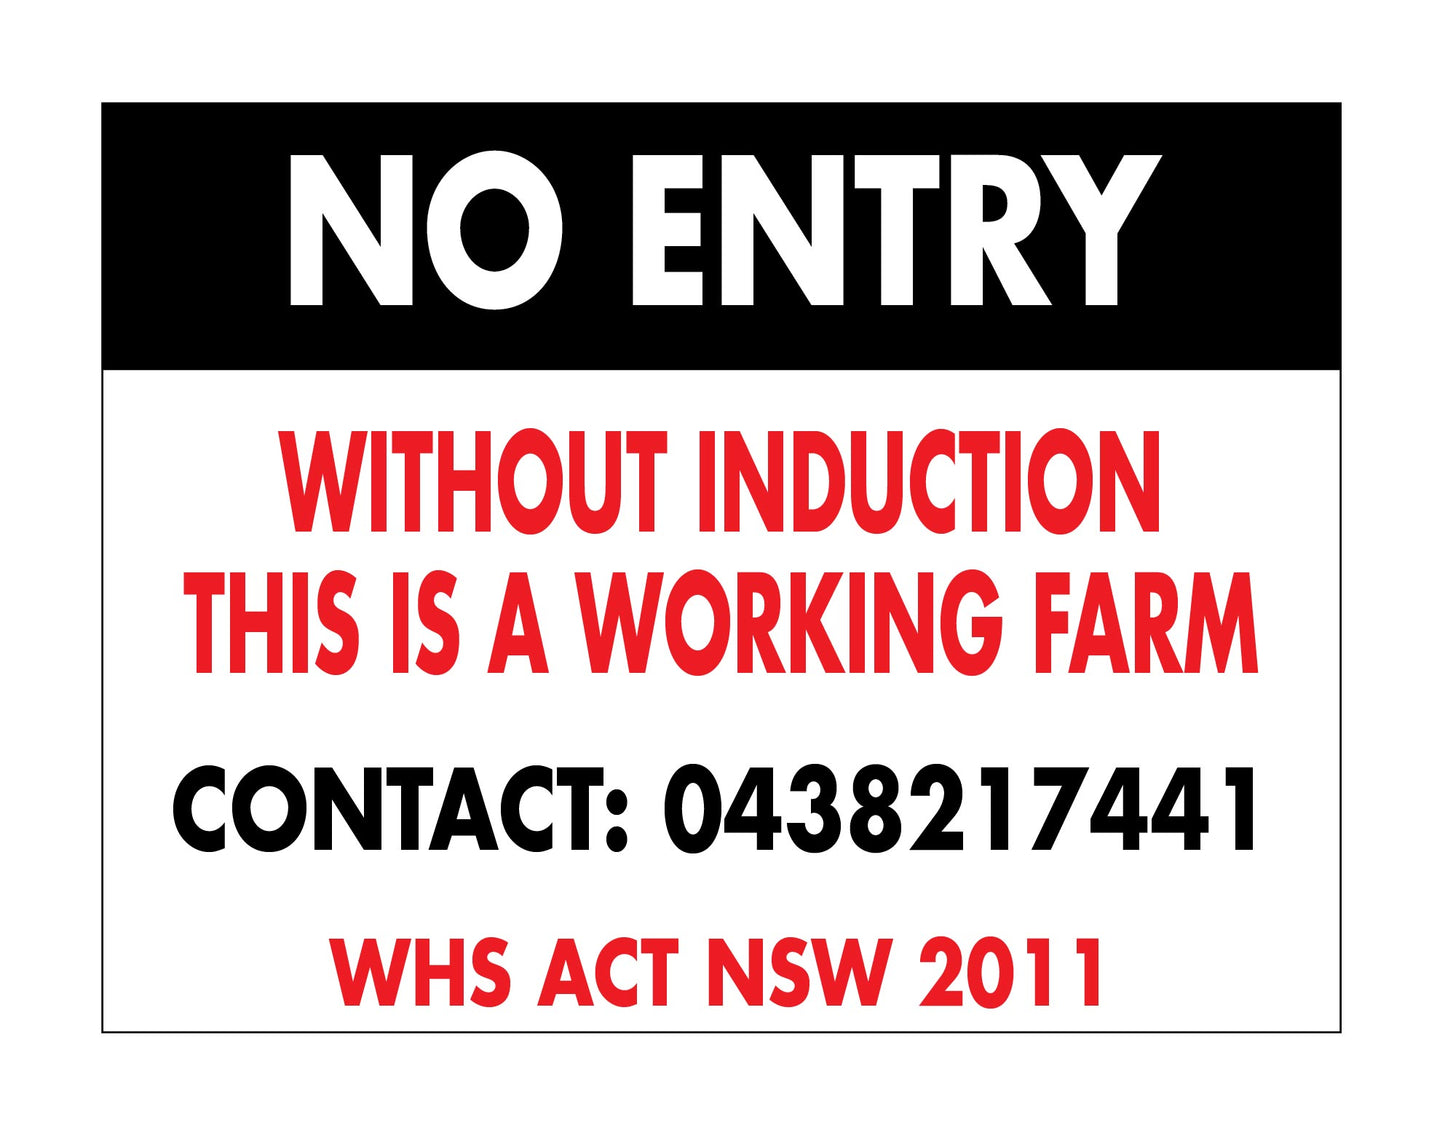 No Entry Without Induction This Is A Working Farm - Contact Number